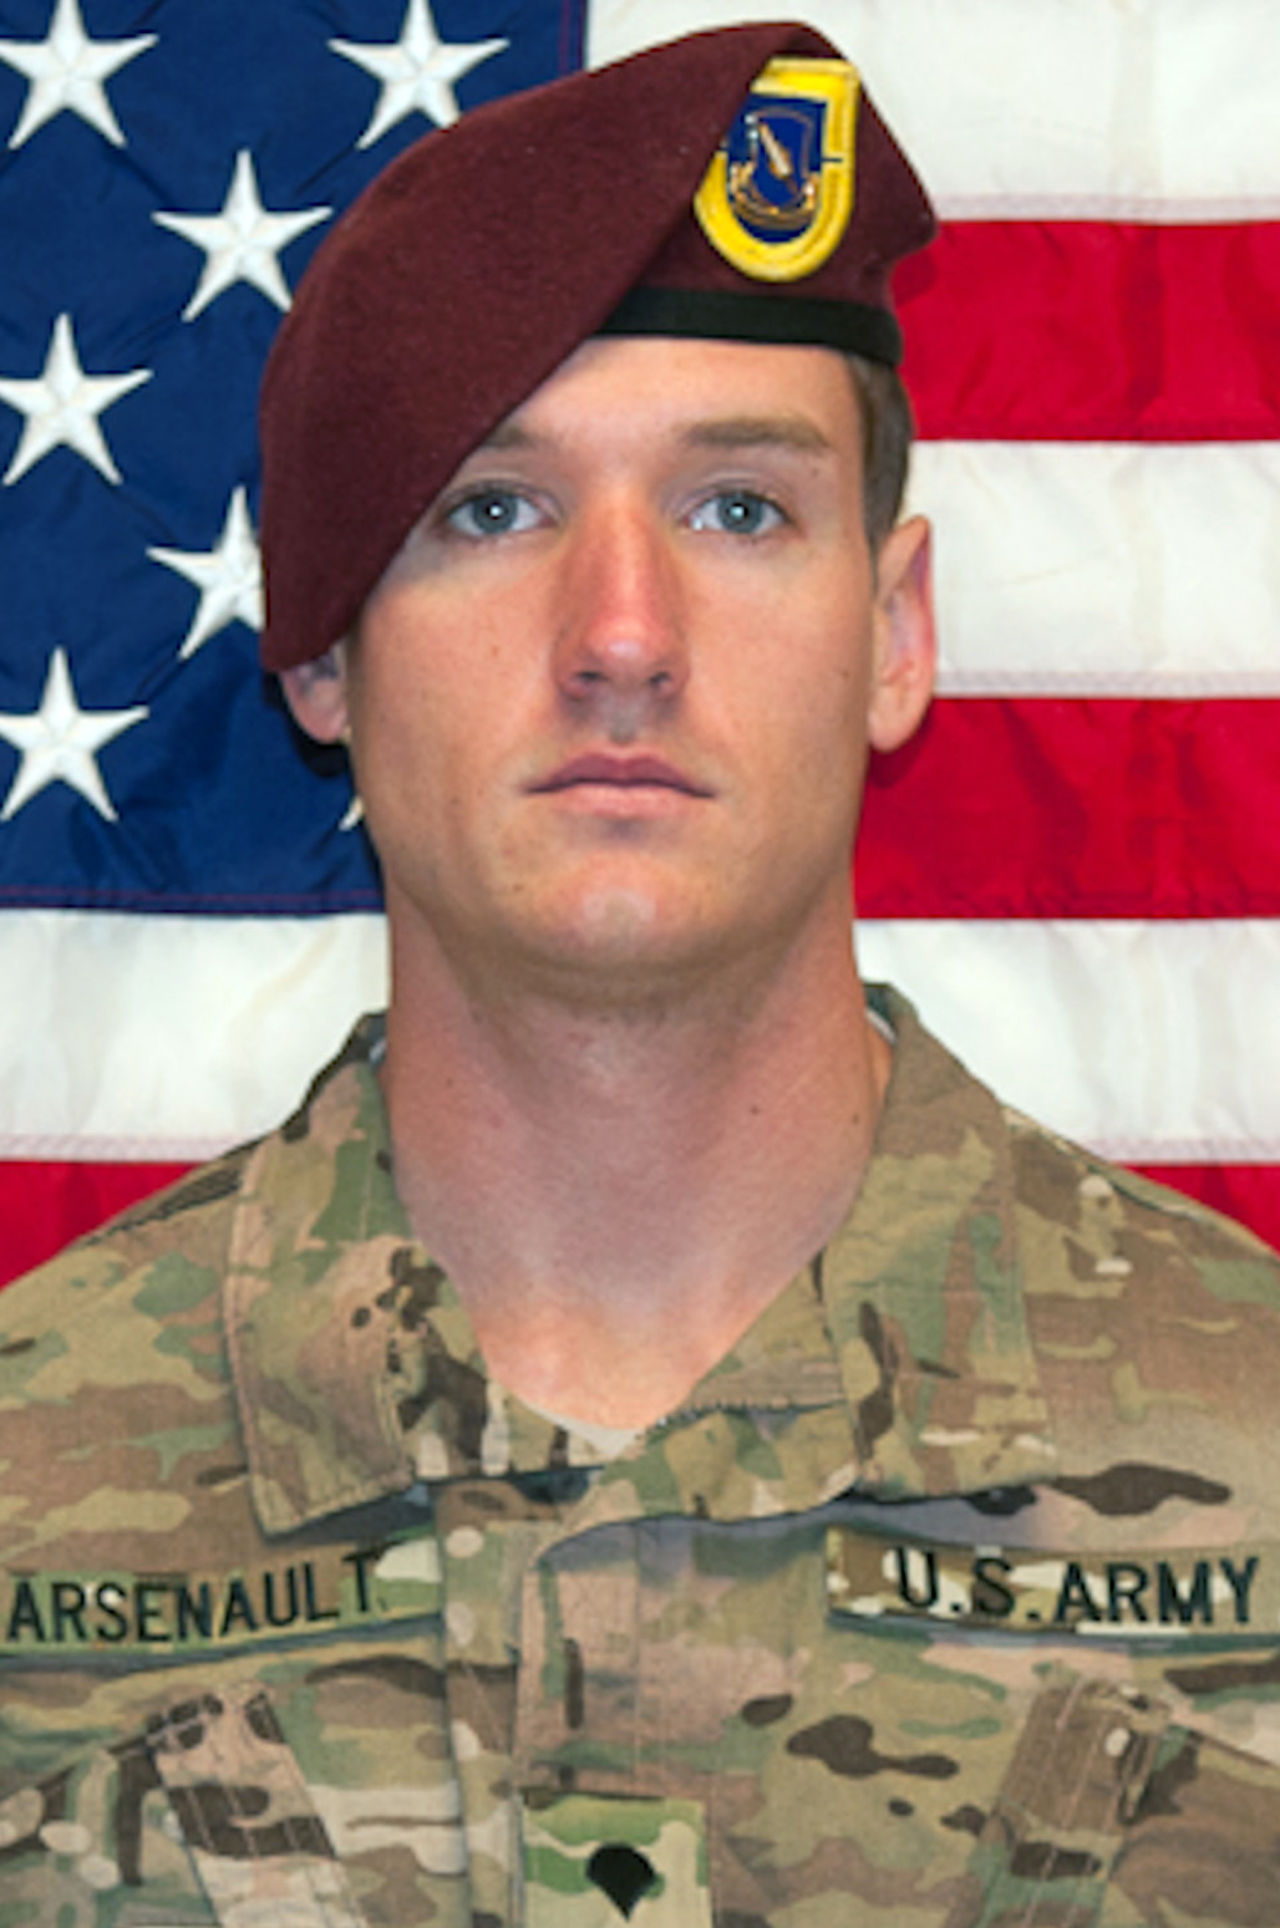 This photo provided by the U.S. Army shows Spc. Brian Arsenault. (Jonathan A. Shaw, U.S. Army/AP)